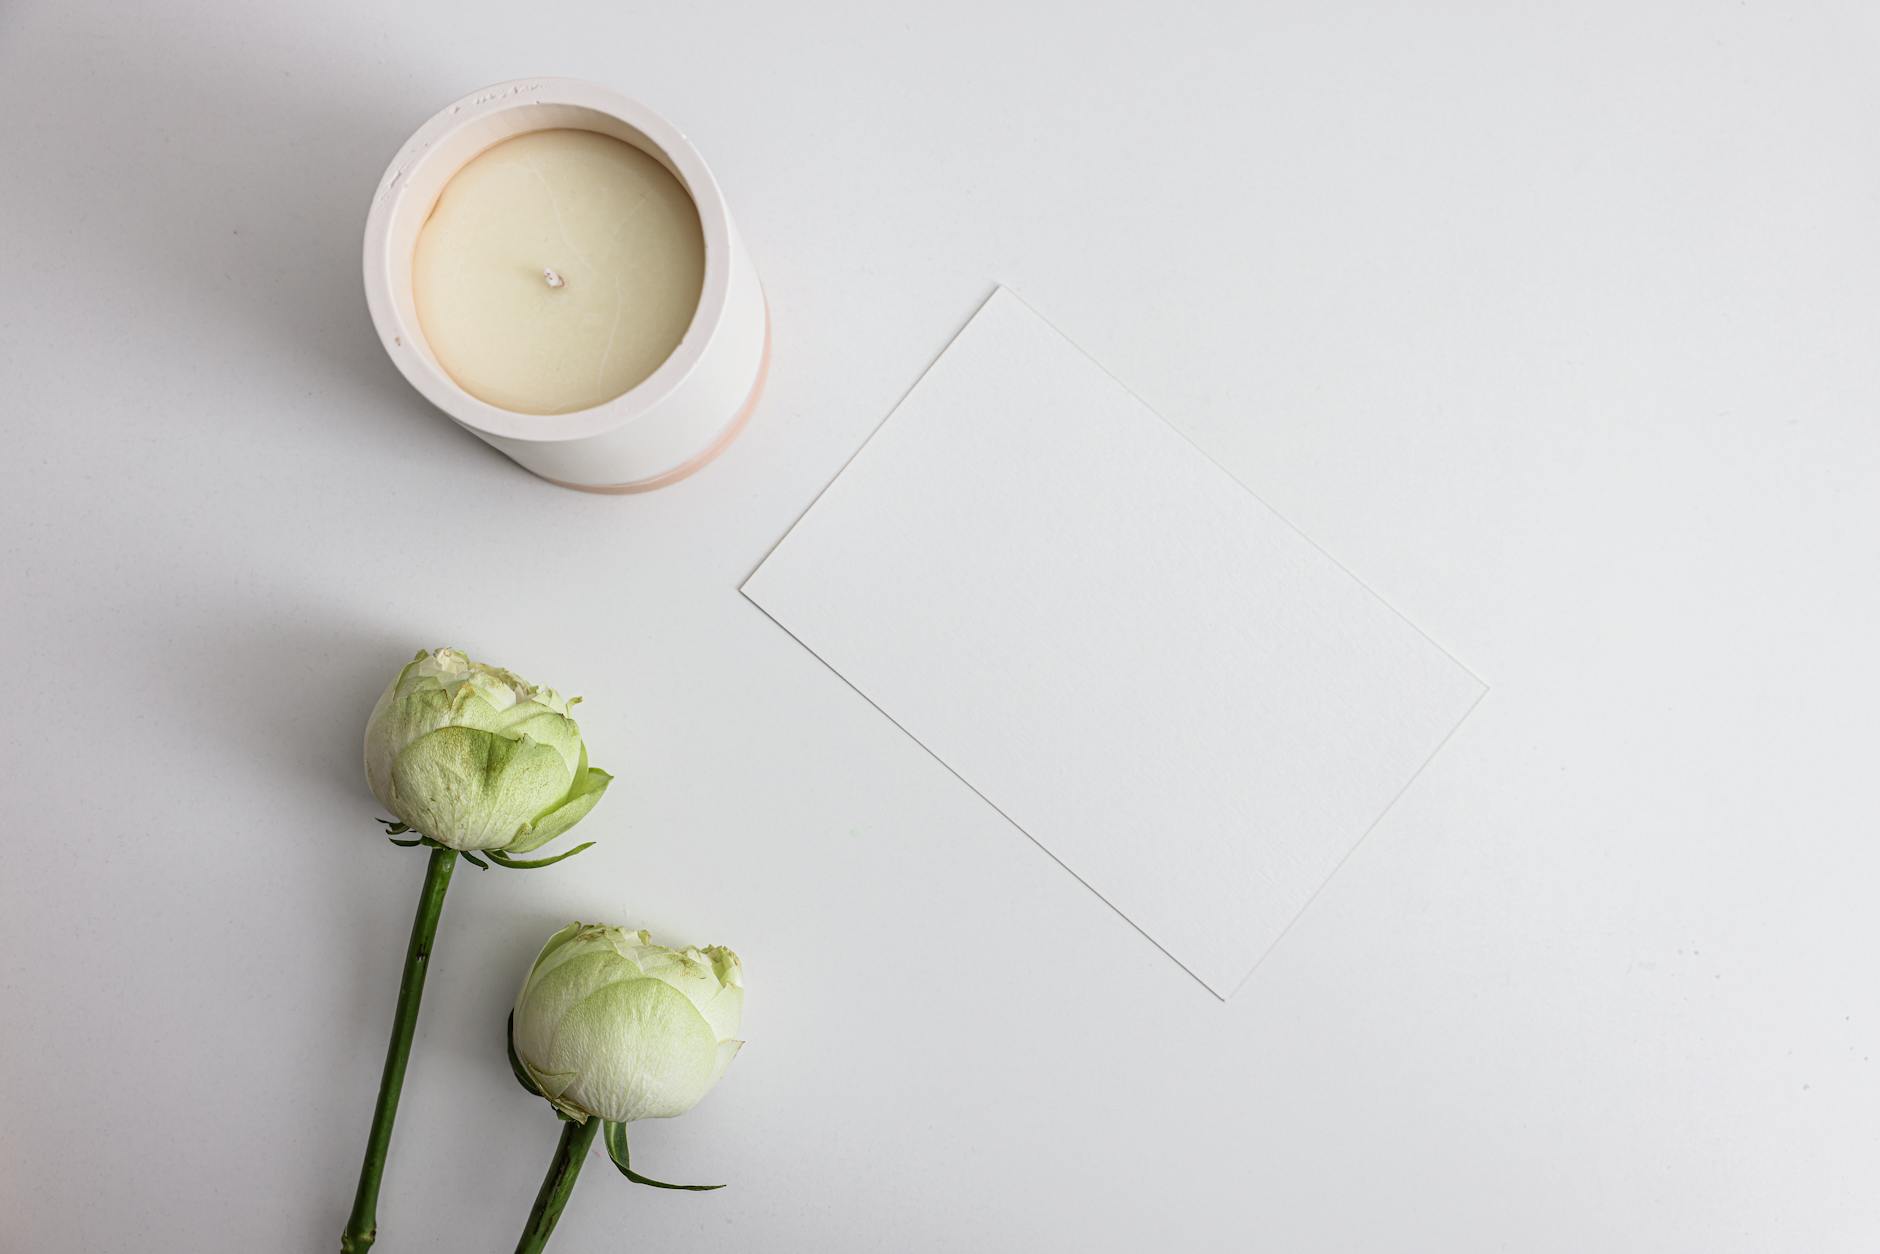 Beautiful Flowers Near Scented Candle and Envelope on a White Surface